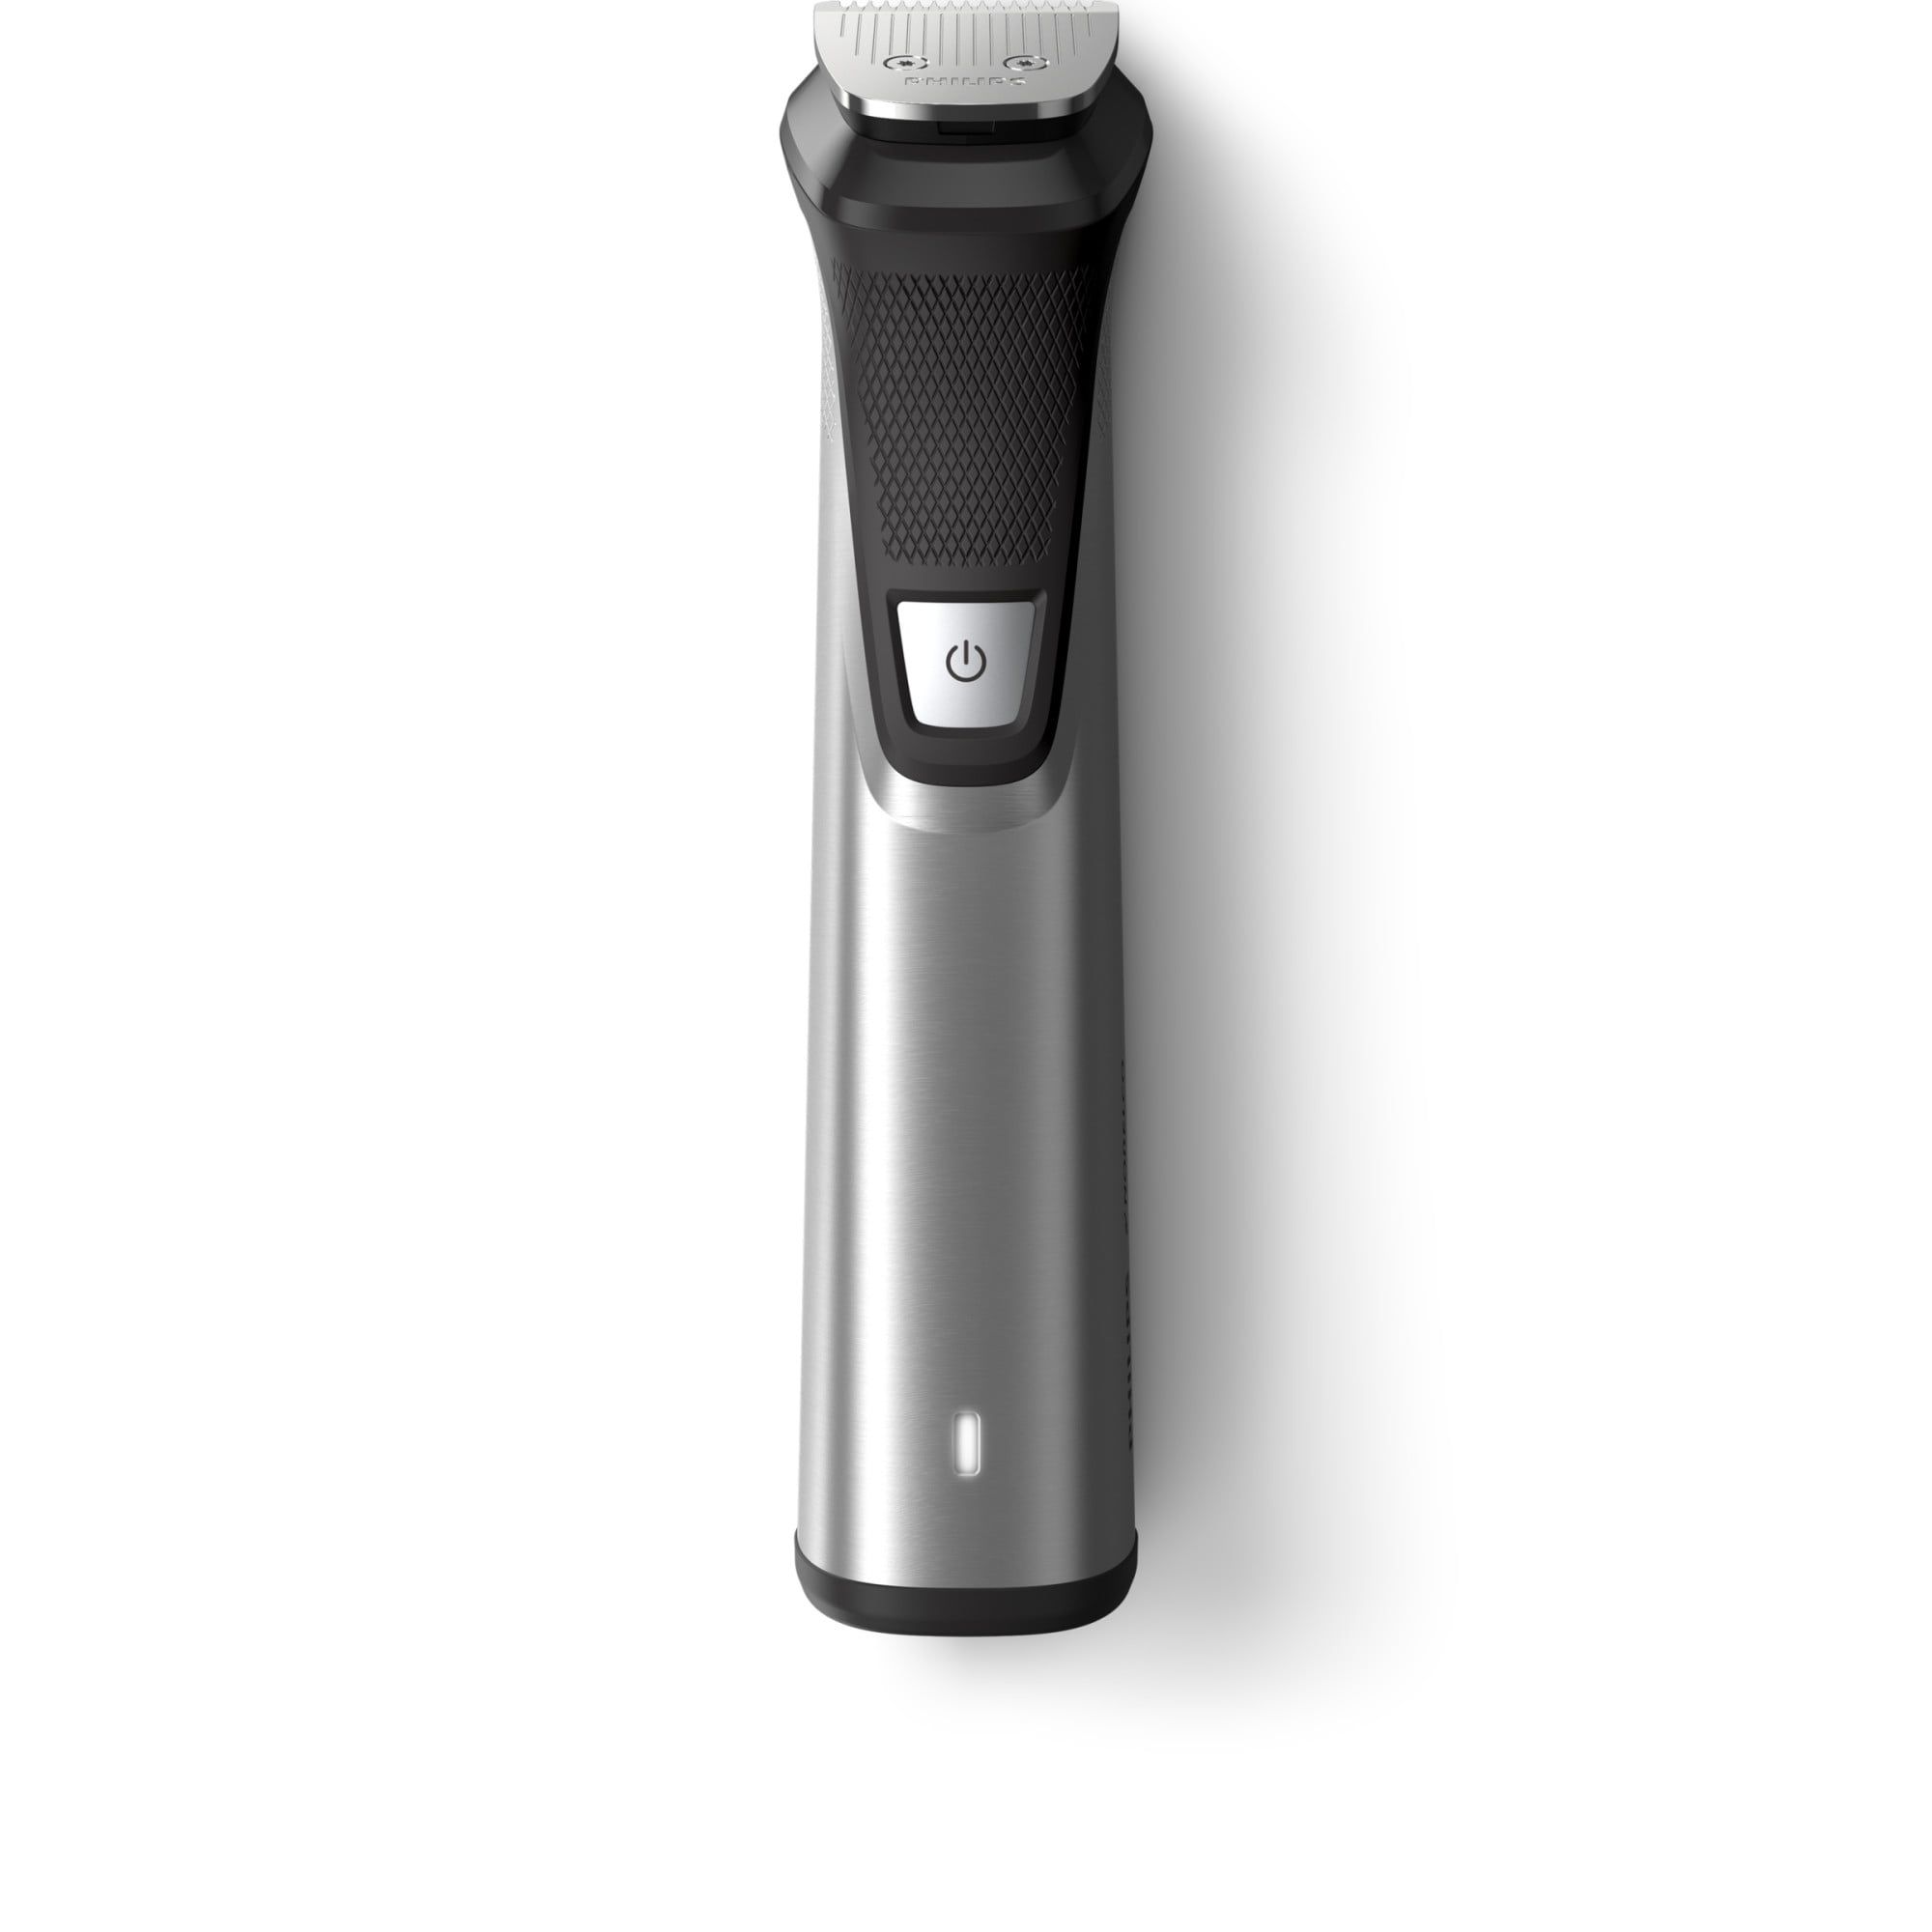 tendens kimplante Intuition Philips Norelco 9000, Prestige, Men'S All In One Trimmer For Beard, Head,  Hair, Body, and Face - No Blade Oil Needed, MG7771/70 - Walmart.com